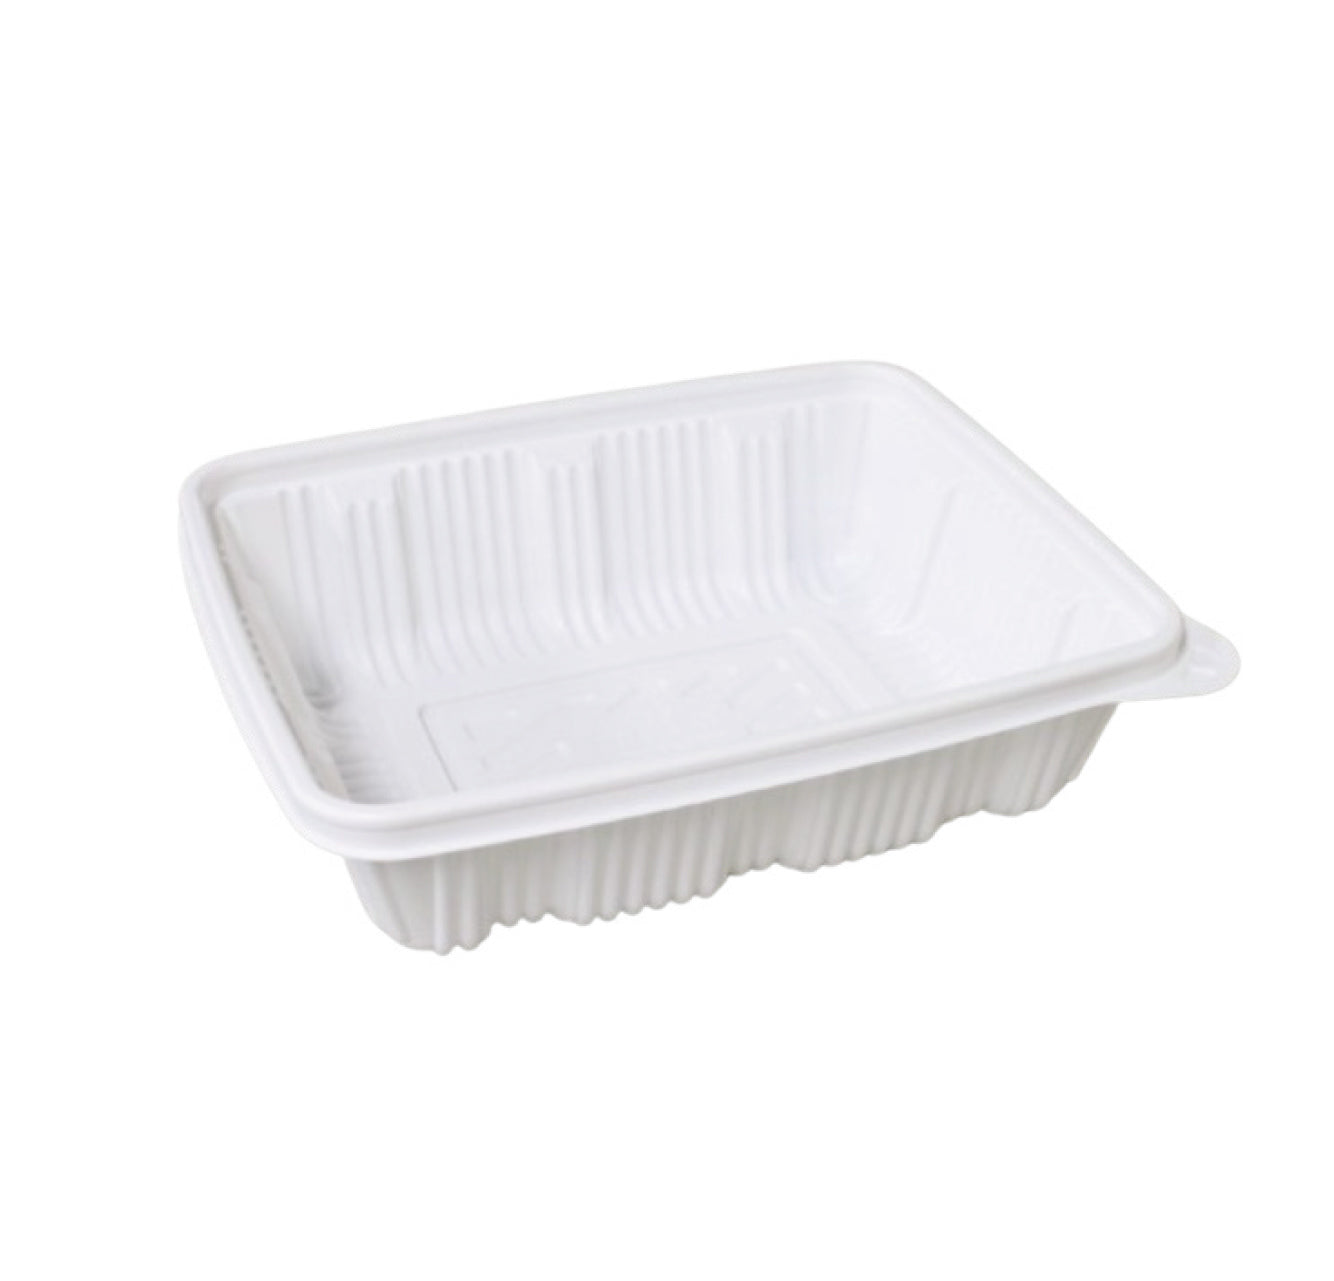 JB 11 x 9 x 2(Small) Microwavable P.P. Container